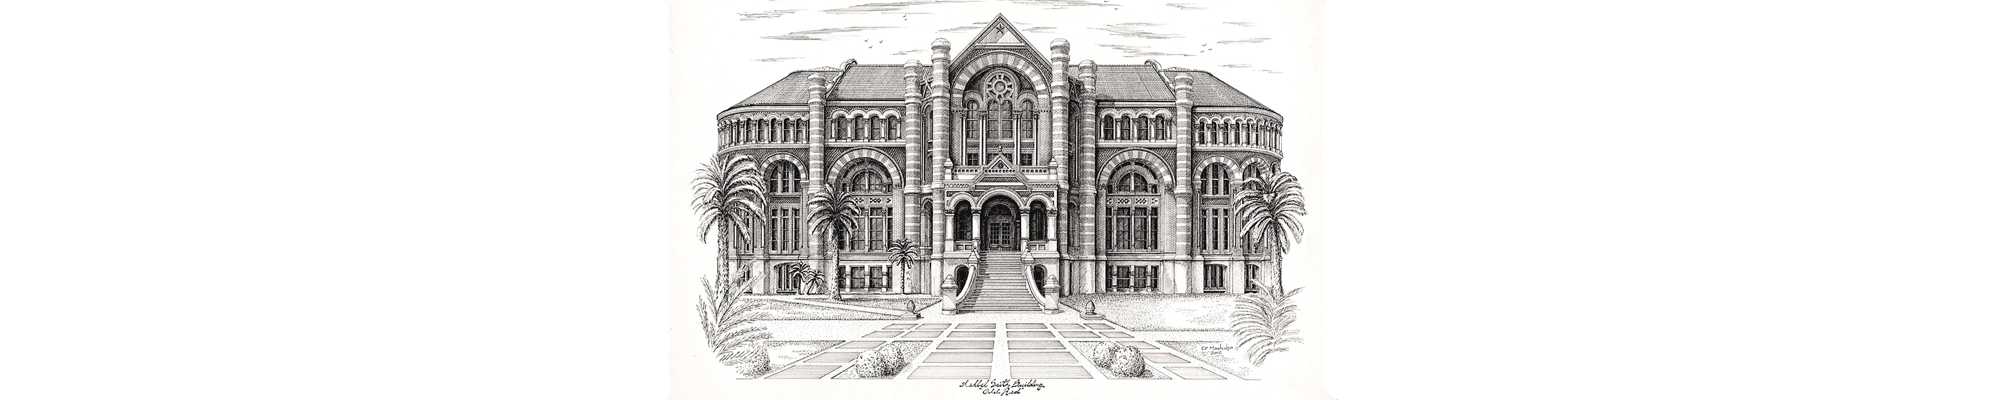 Old Red Ashbel Smith Building Drawing